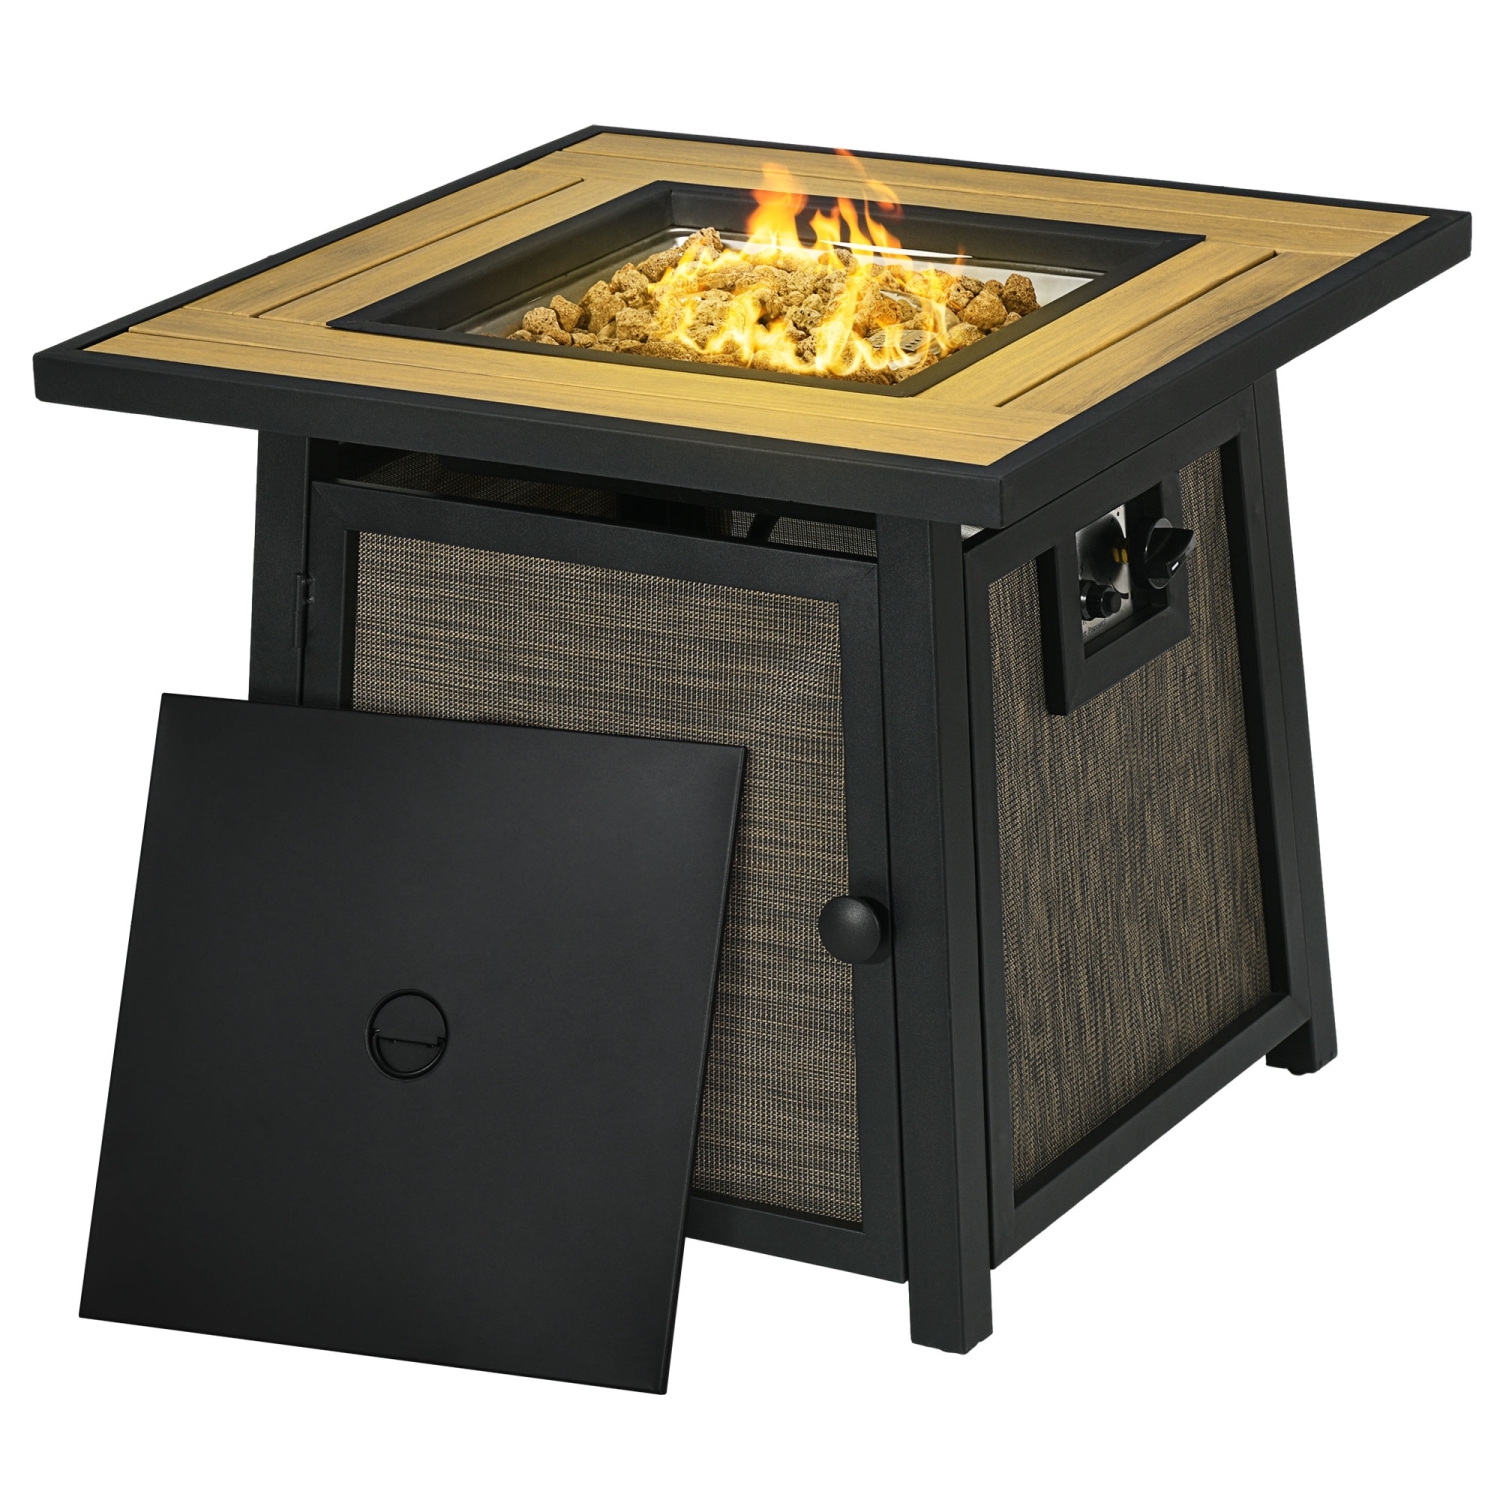 Outsunny 28" Propane Fire Pit Table, 50,000 BTU Propane Fire Table with Steel Tabletop and Lid, Square Gas Firepit Table with Pulse Ignition, Lava Rocks, Waterproof Cover, Brown